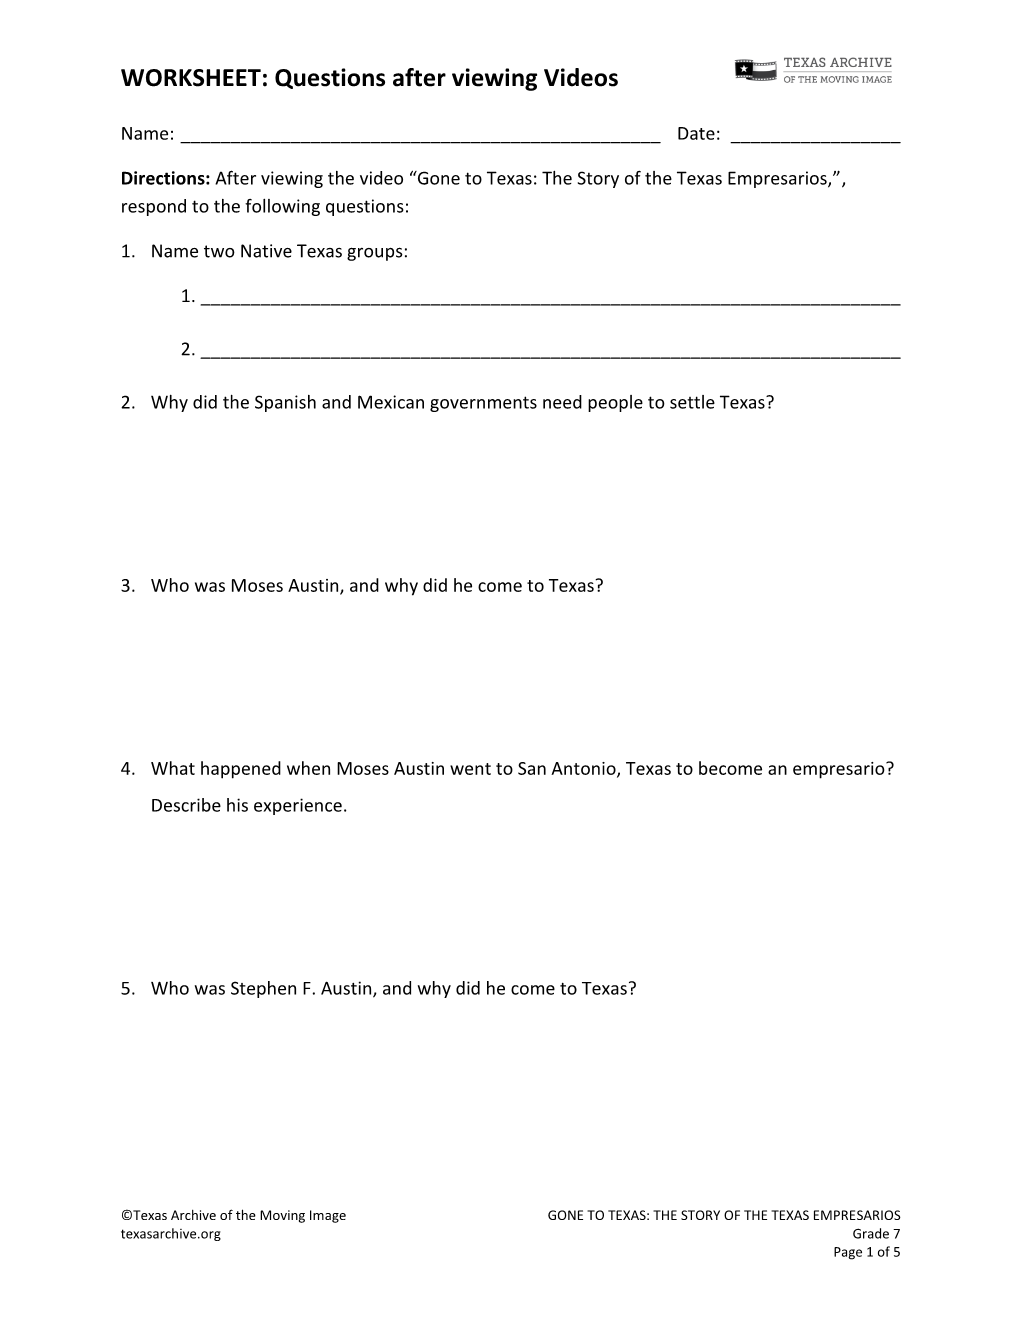 WORKSHEET: Questions After Viewing Videos